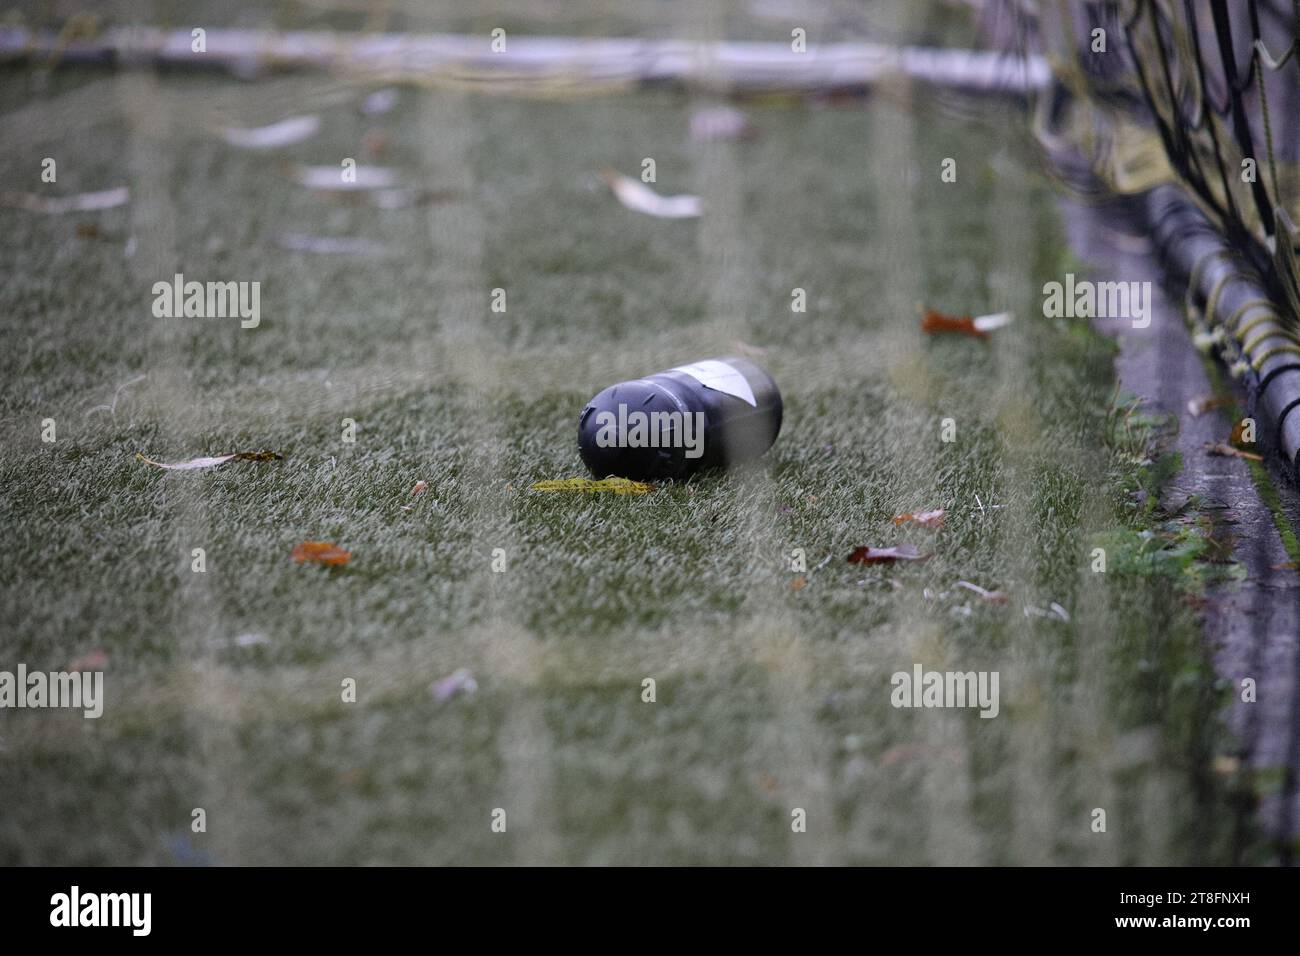 An empty, clear glass soda bottle on the ground in front of a white picket fence Stock Photo